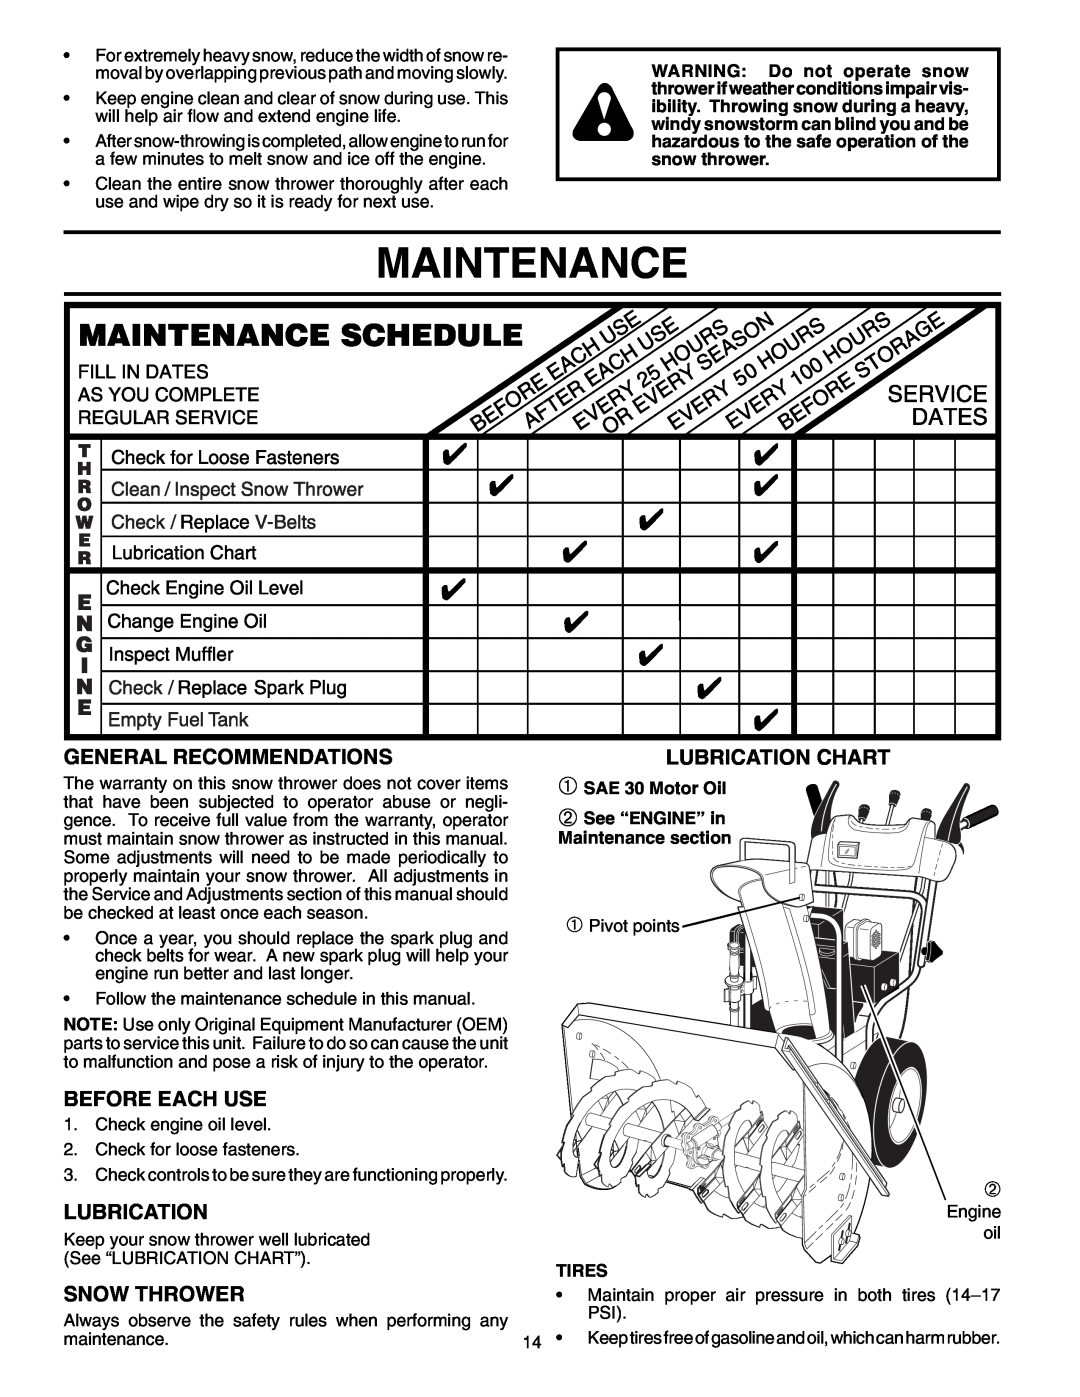 Yard Machines 961940001 Maintenance, General Recommendations, Before Each Use, Lubrication Chart, Snow Thrower, Tires 